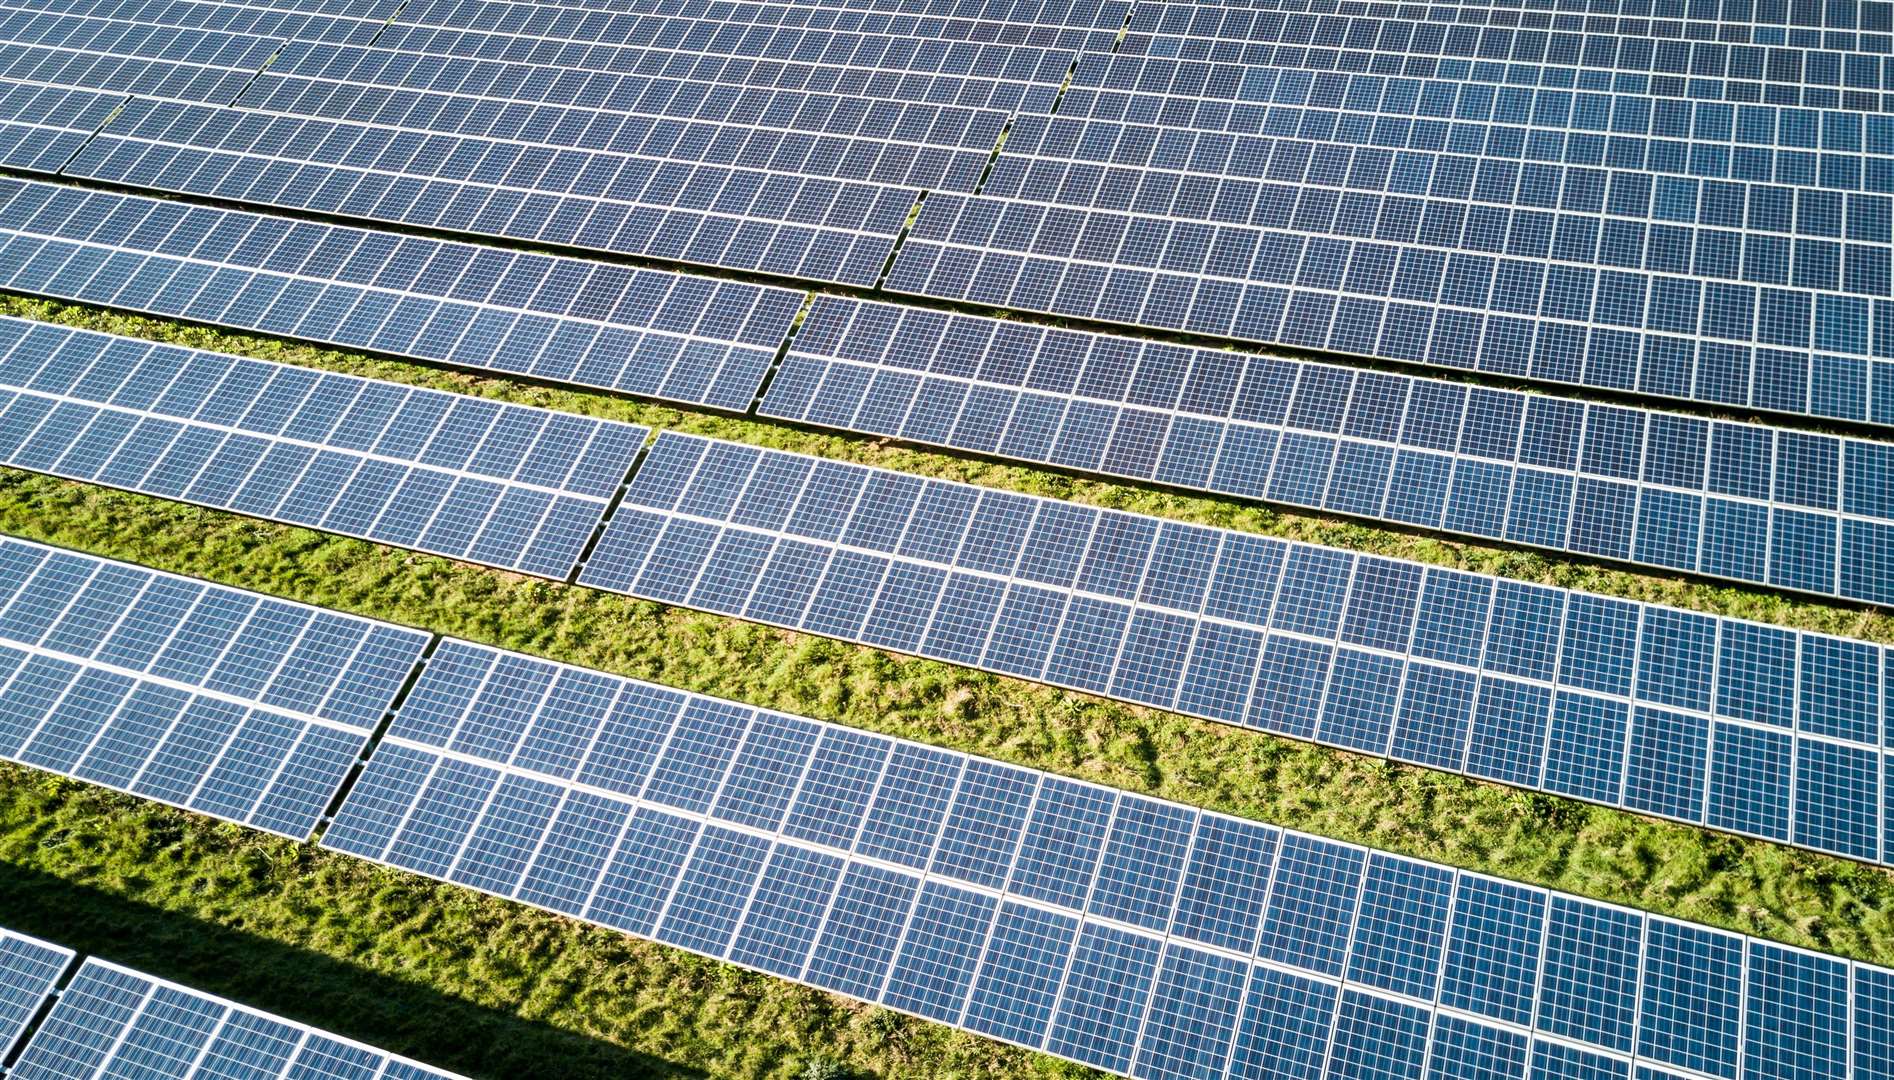 An example of what the site might look like, from a solar farm in Ashford